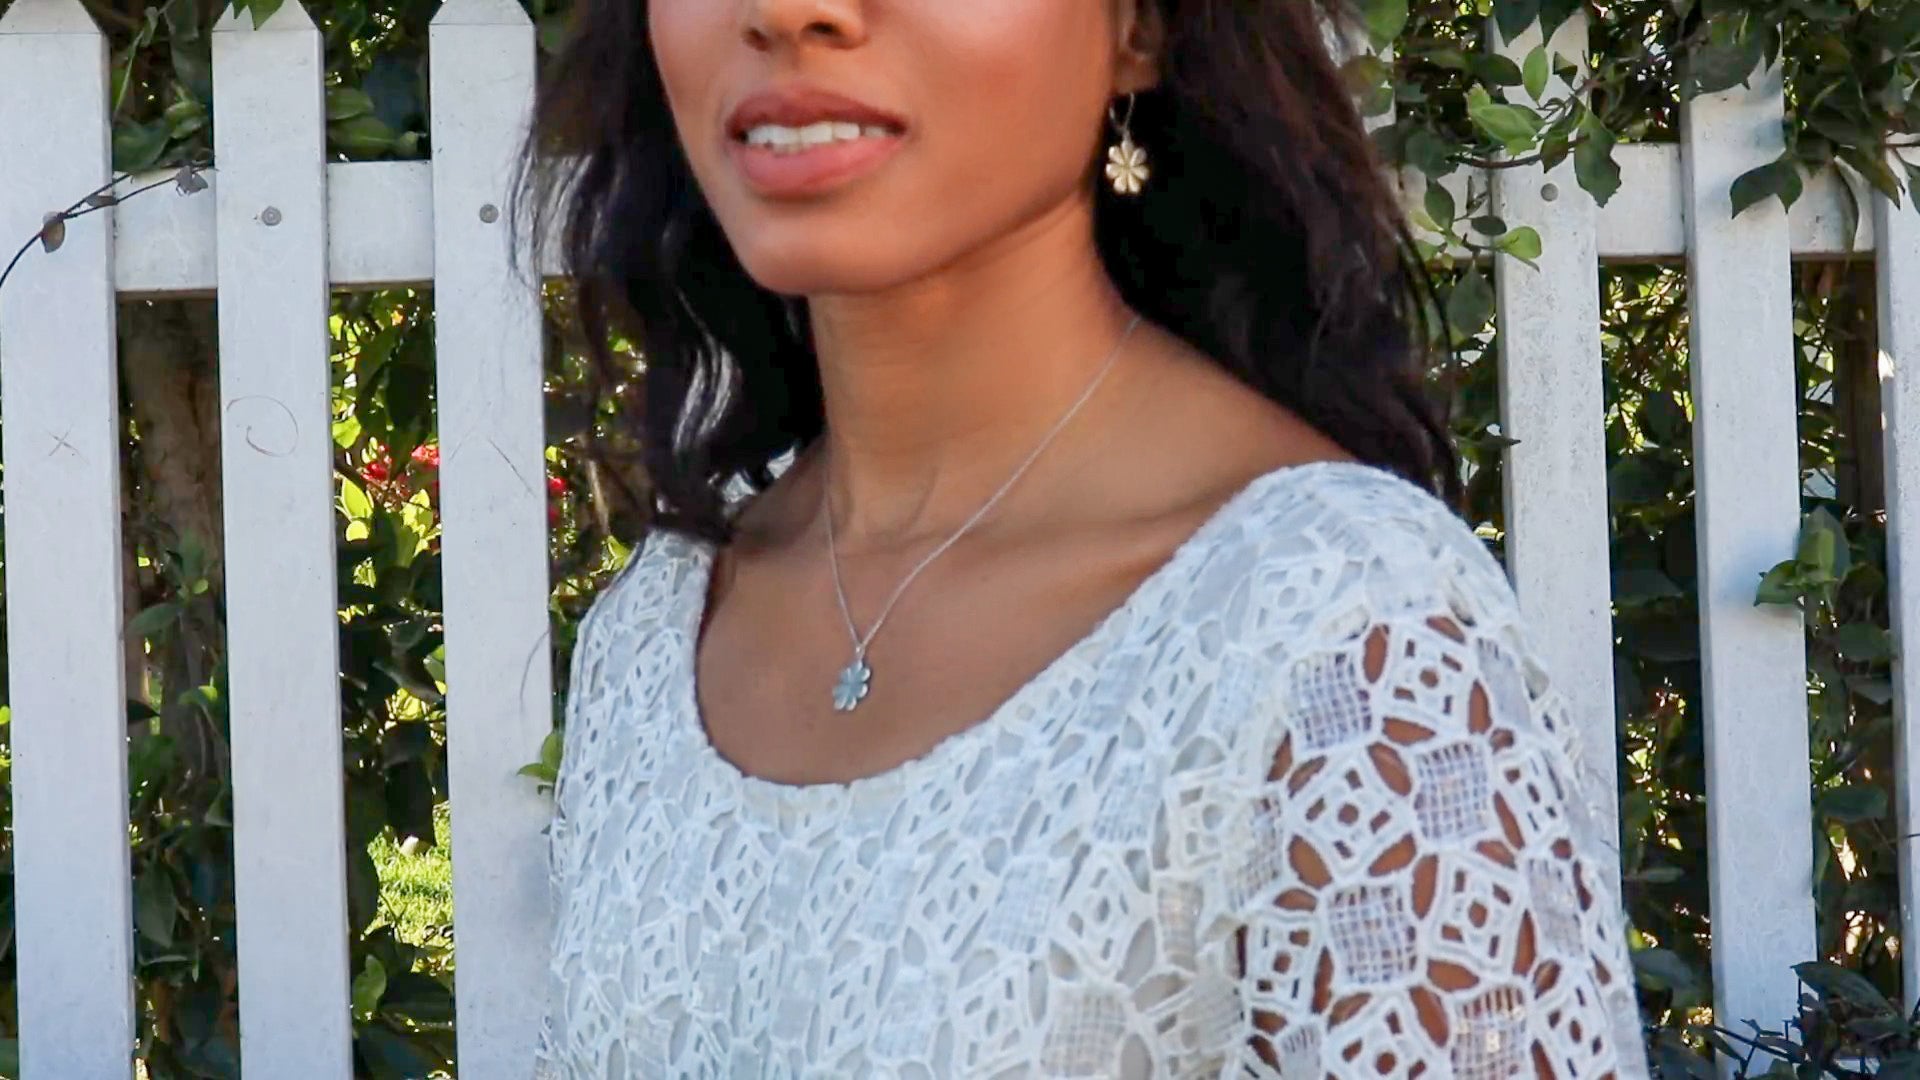 woman in bridal dress standing in front of a white picket fence wearing flower pendant necklace and matching earrings